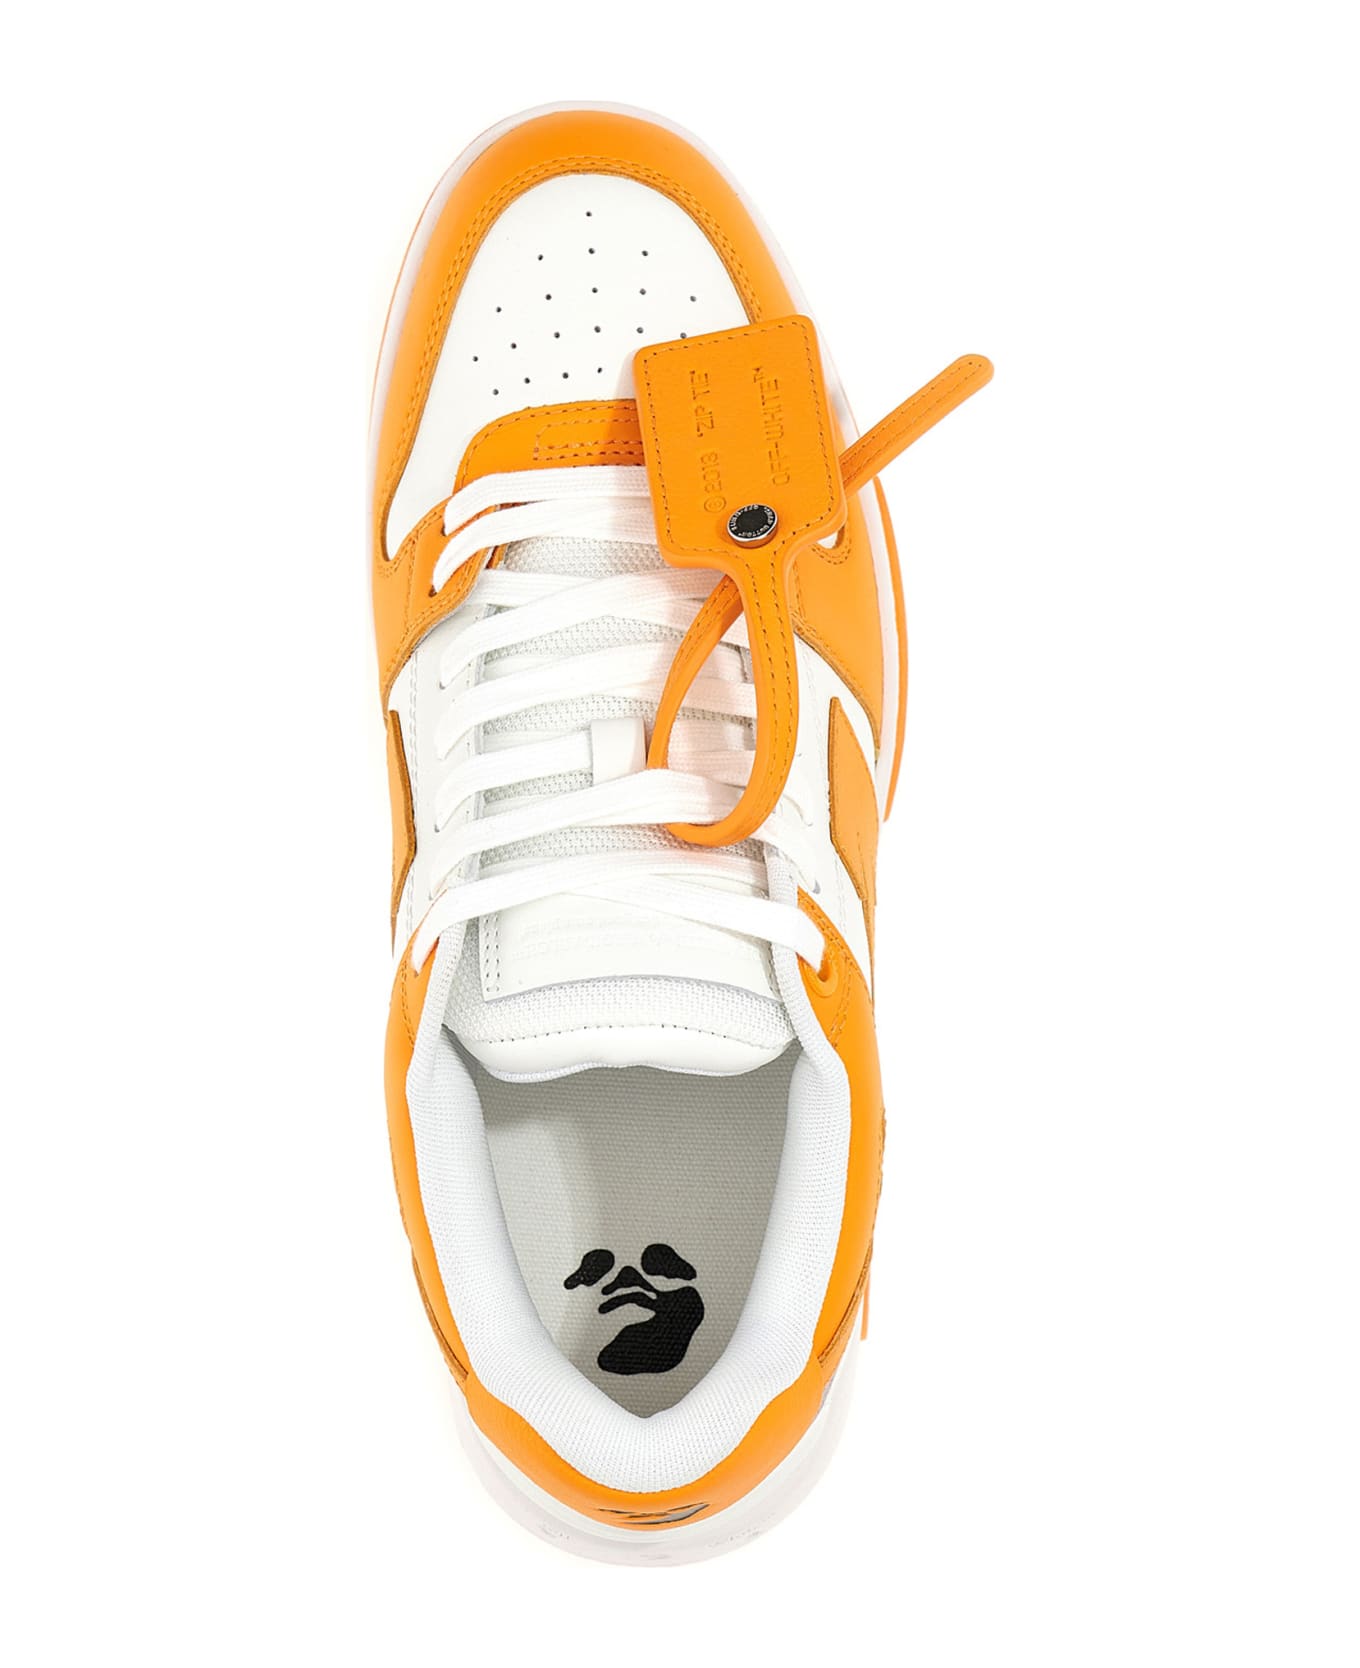 Off-White 'out Of Office' Sneakers - Orange